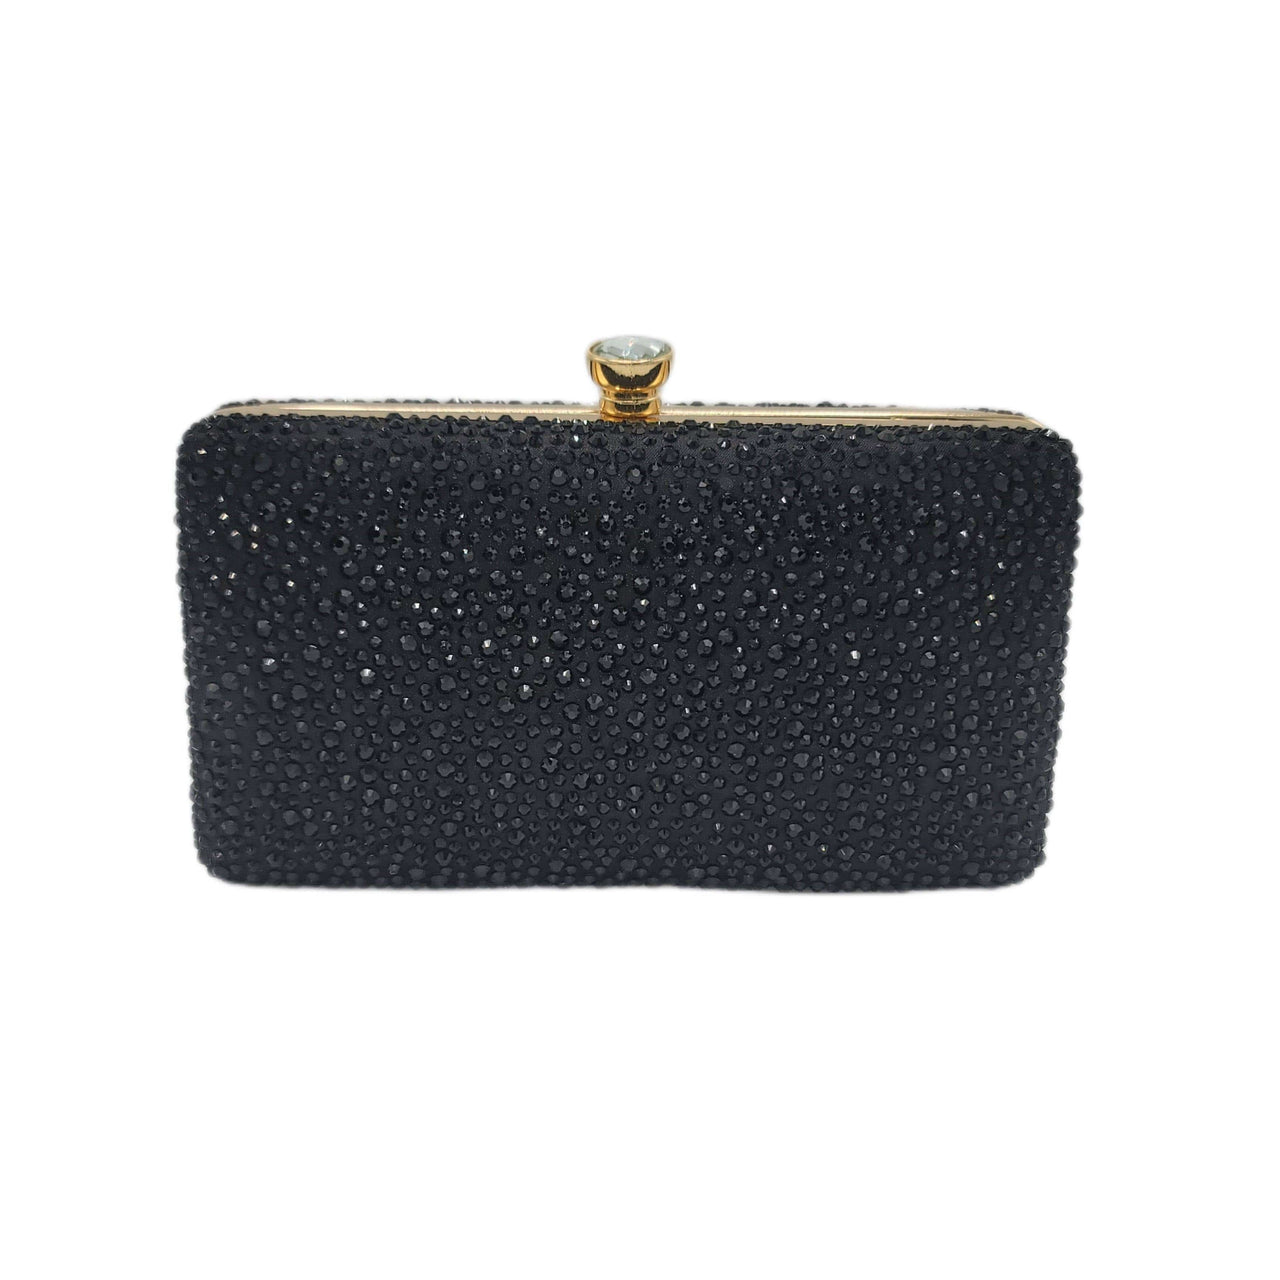 The Bag Couture Handbags, Wallets & Cases Stone Embellished Clutch 2 Black